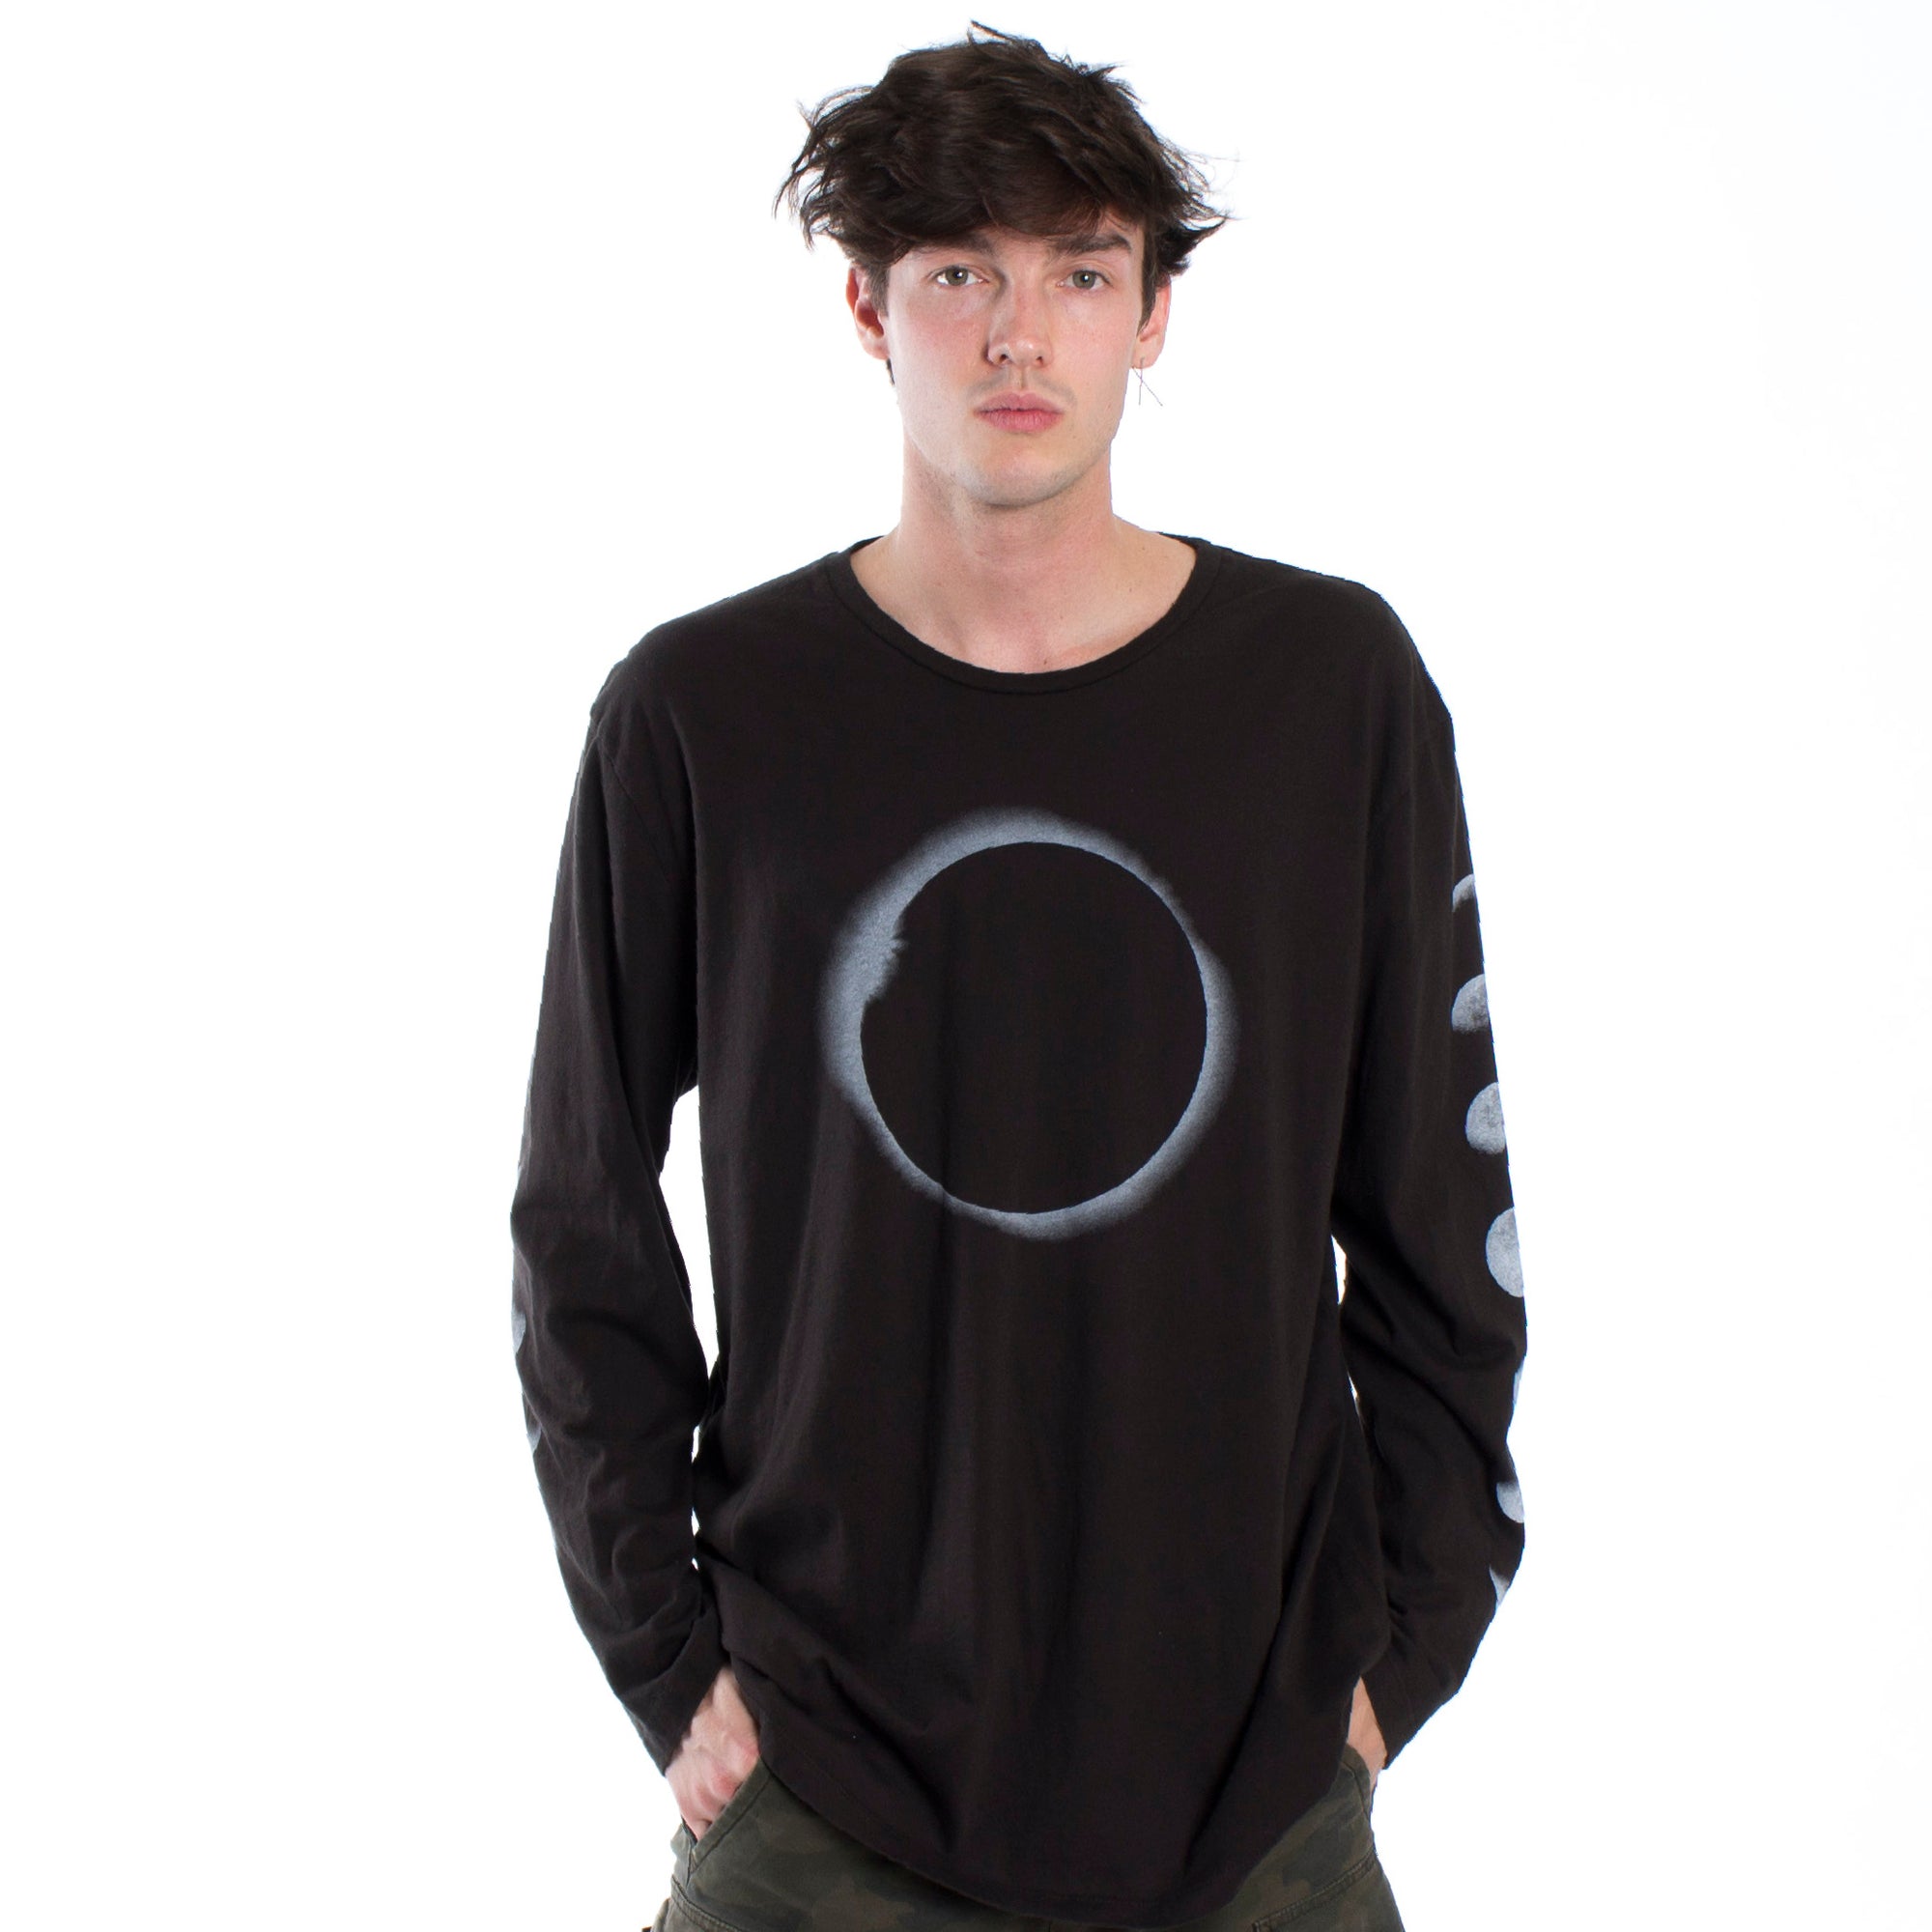 Full front photo of Lunar graphic phases long sleeve tee printed on both sleeves with a large eclipse graphic on front chest.